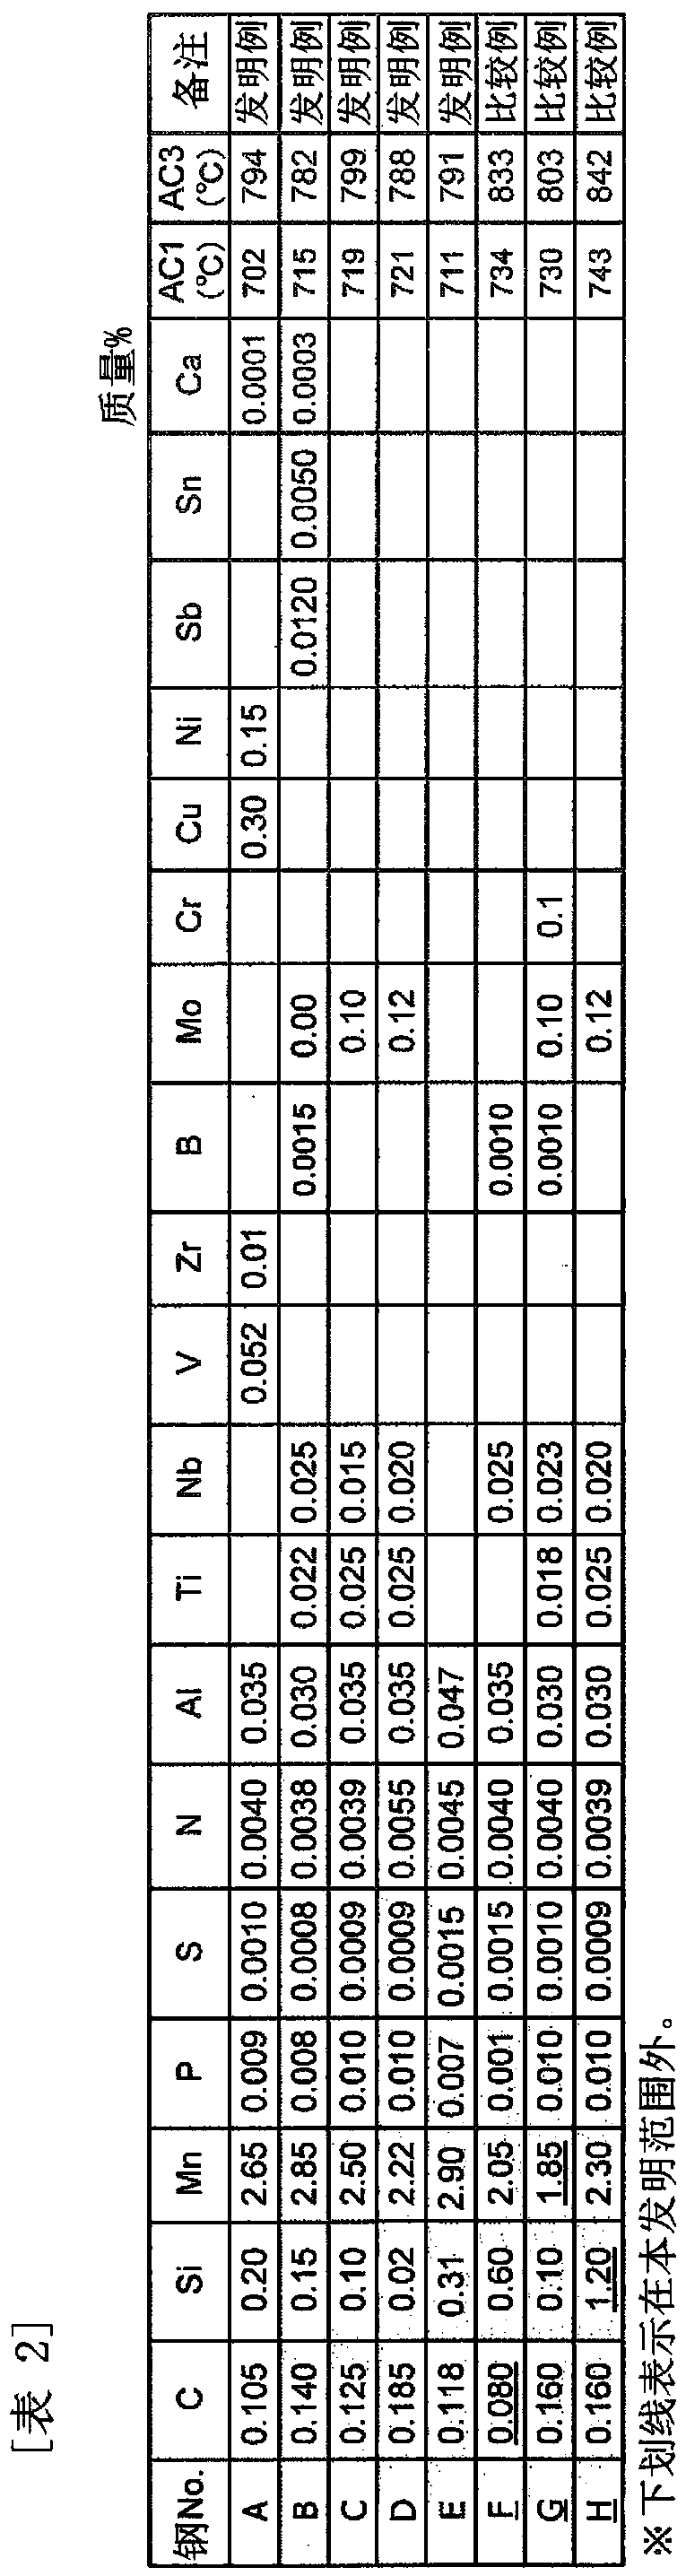 High-strength galvanized steel sheet and method for manufacturing same